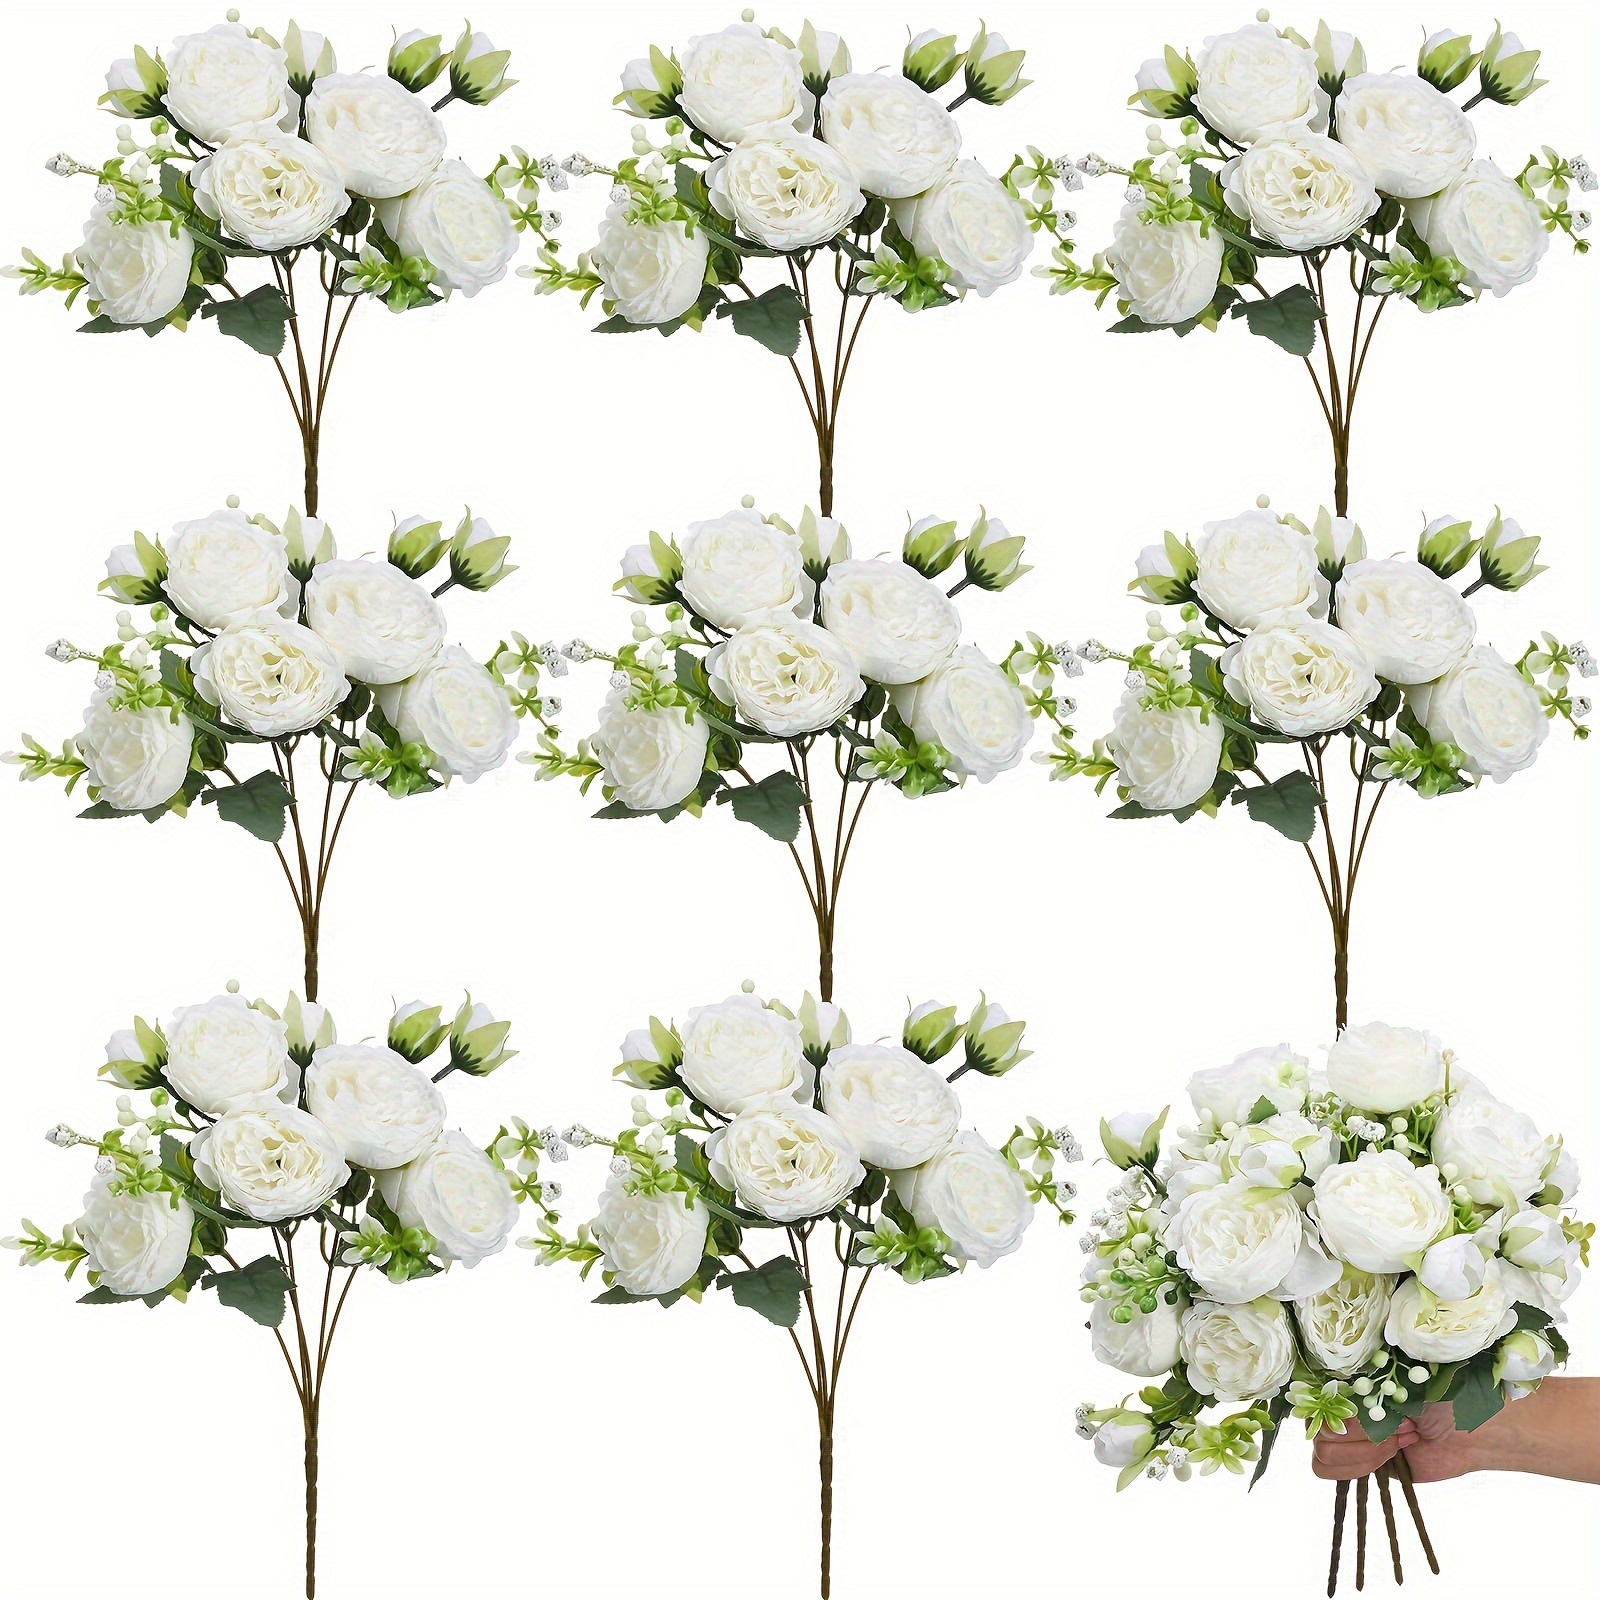 

4pcs Spring Festival Artificial Peony Bouquet, White Flower Bouquet Balls Used For Decorating Vases, Flower Arrangements, Wedding Homes, Parties, Dining Tables, Center Decorations